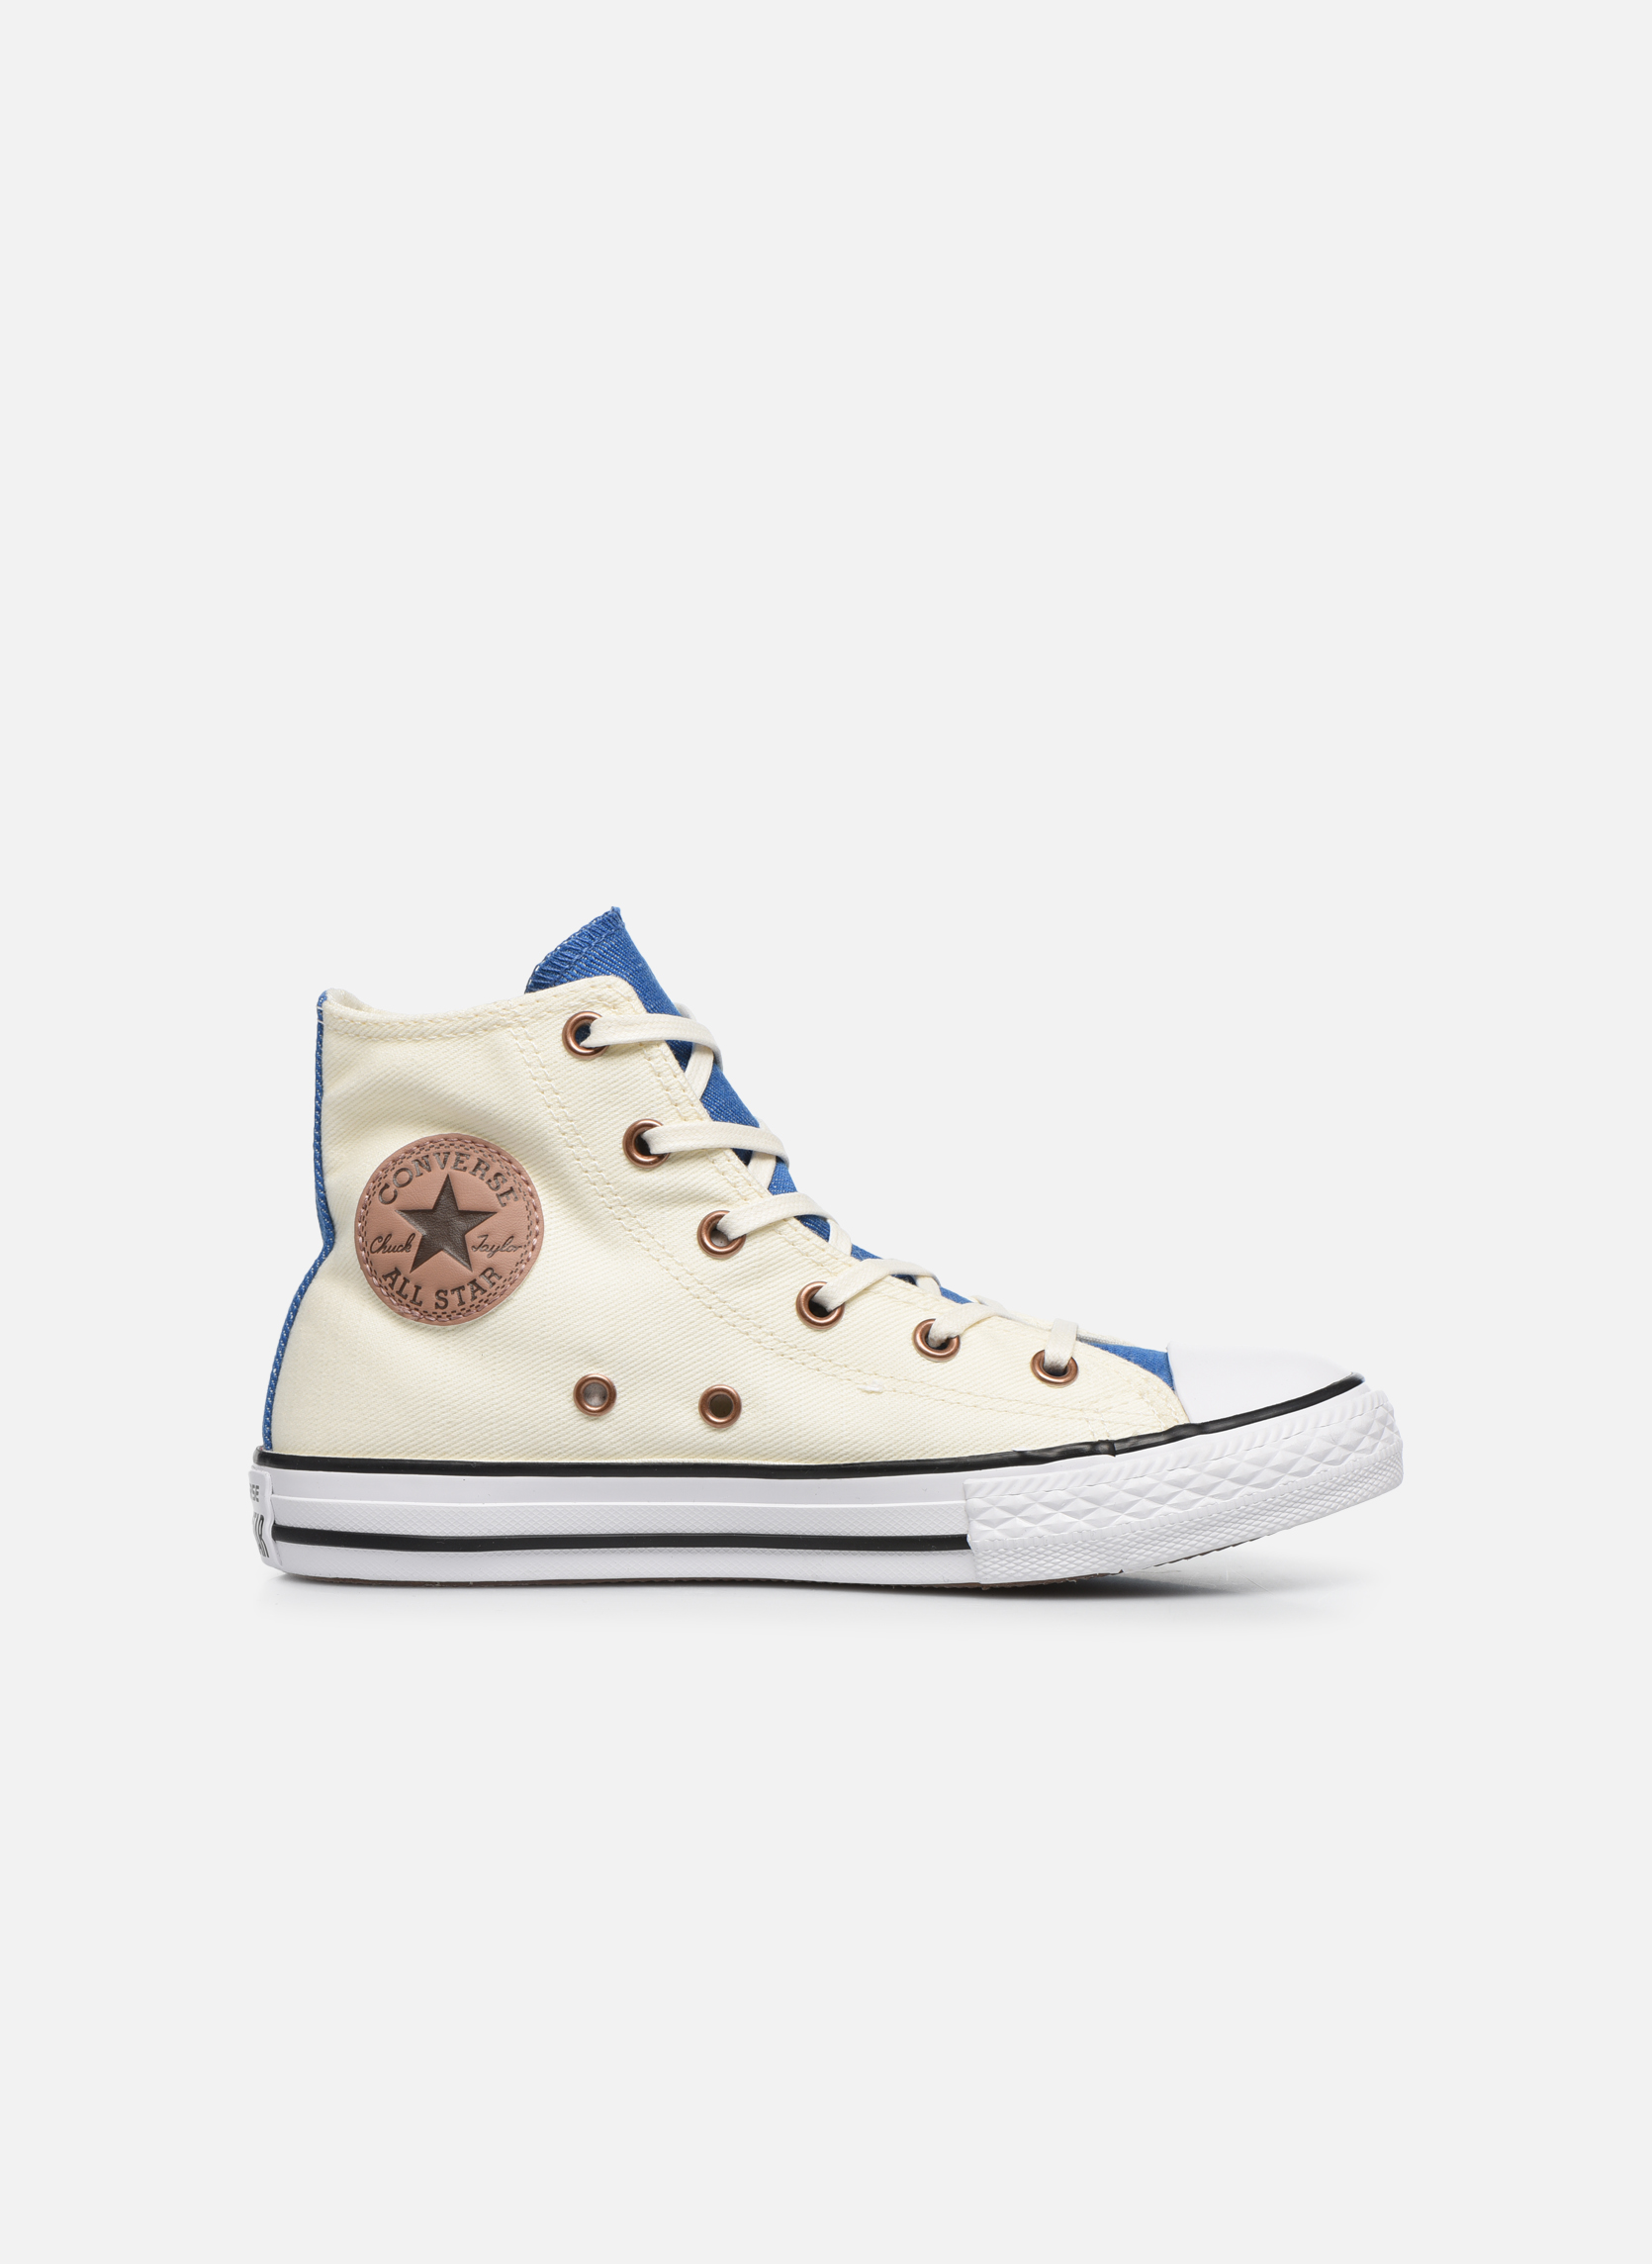 Bambino Converse Chuck Taylor All Star Hi Two Color Chambray Sneakers Beige  - | eBay